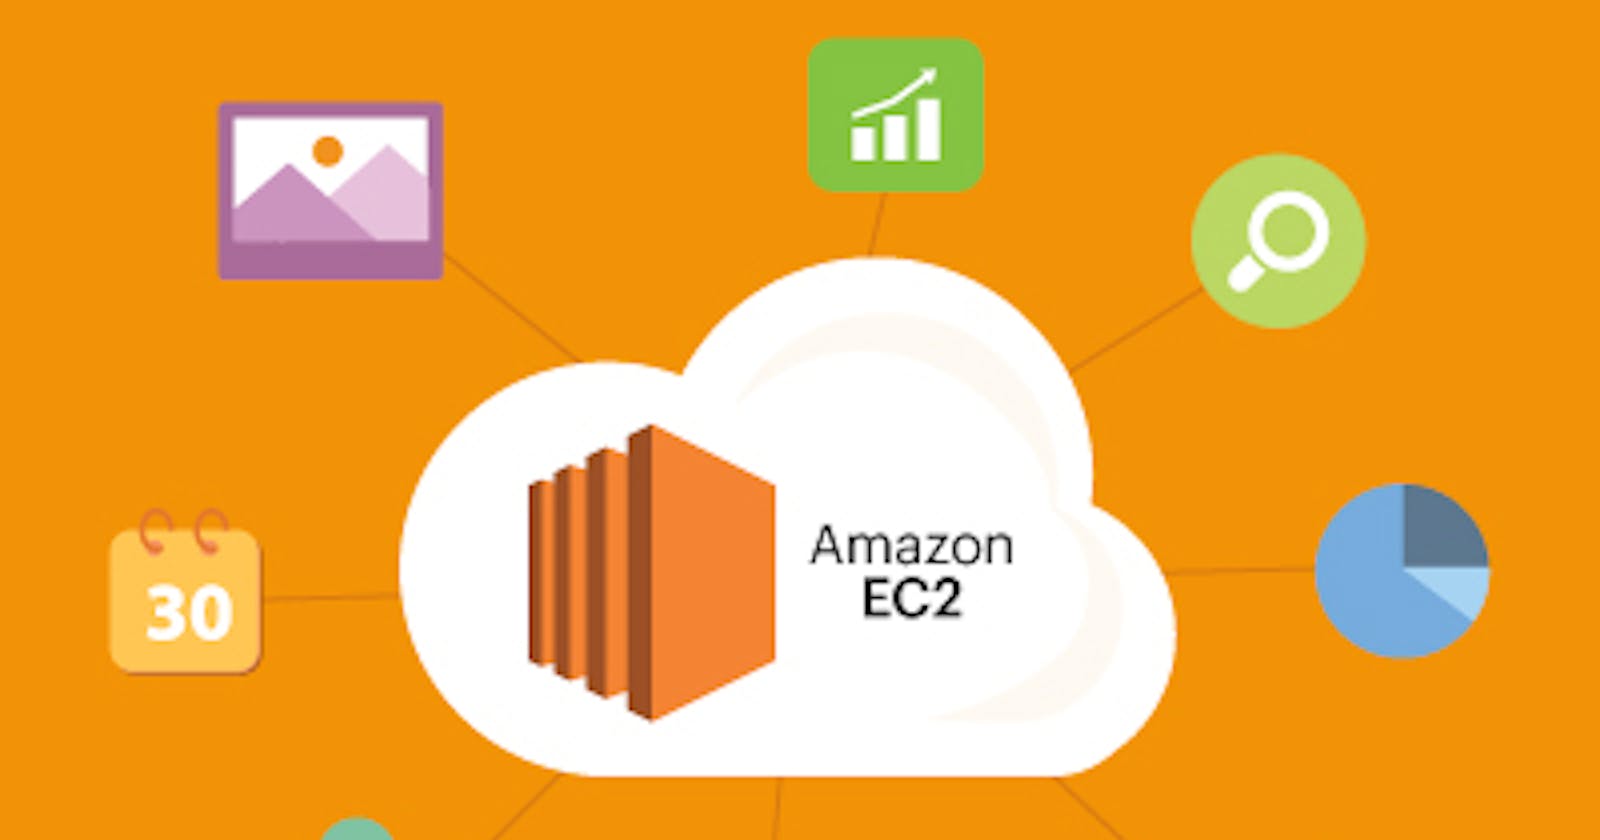 Amazon EC2 - Create and launch your first EC2 instance